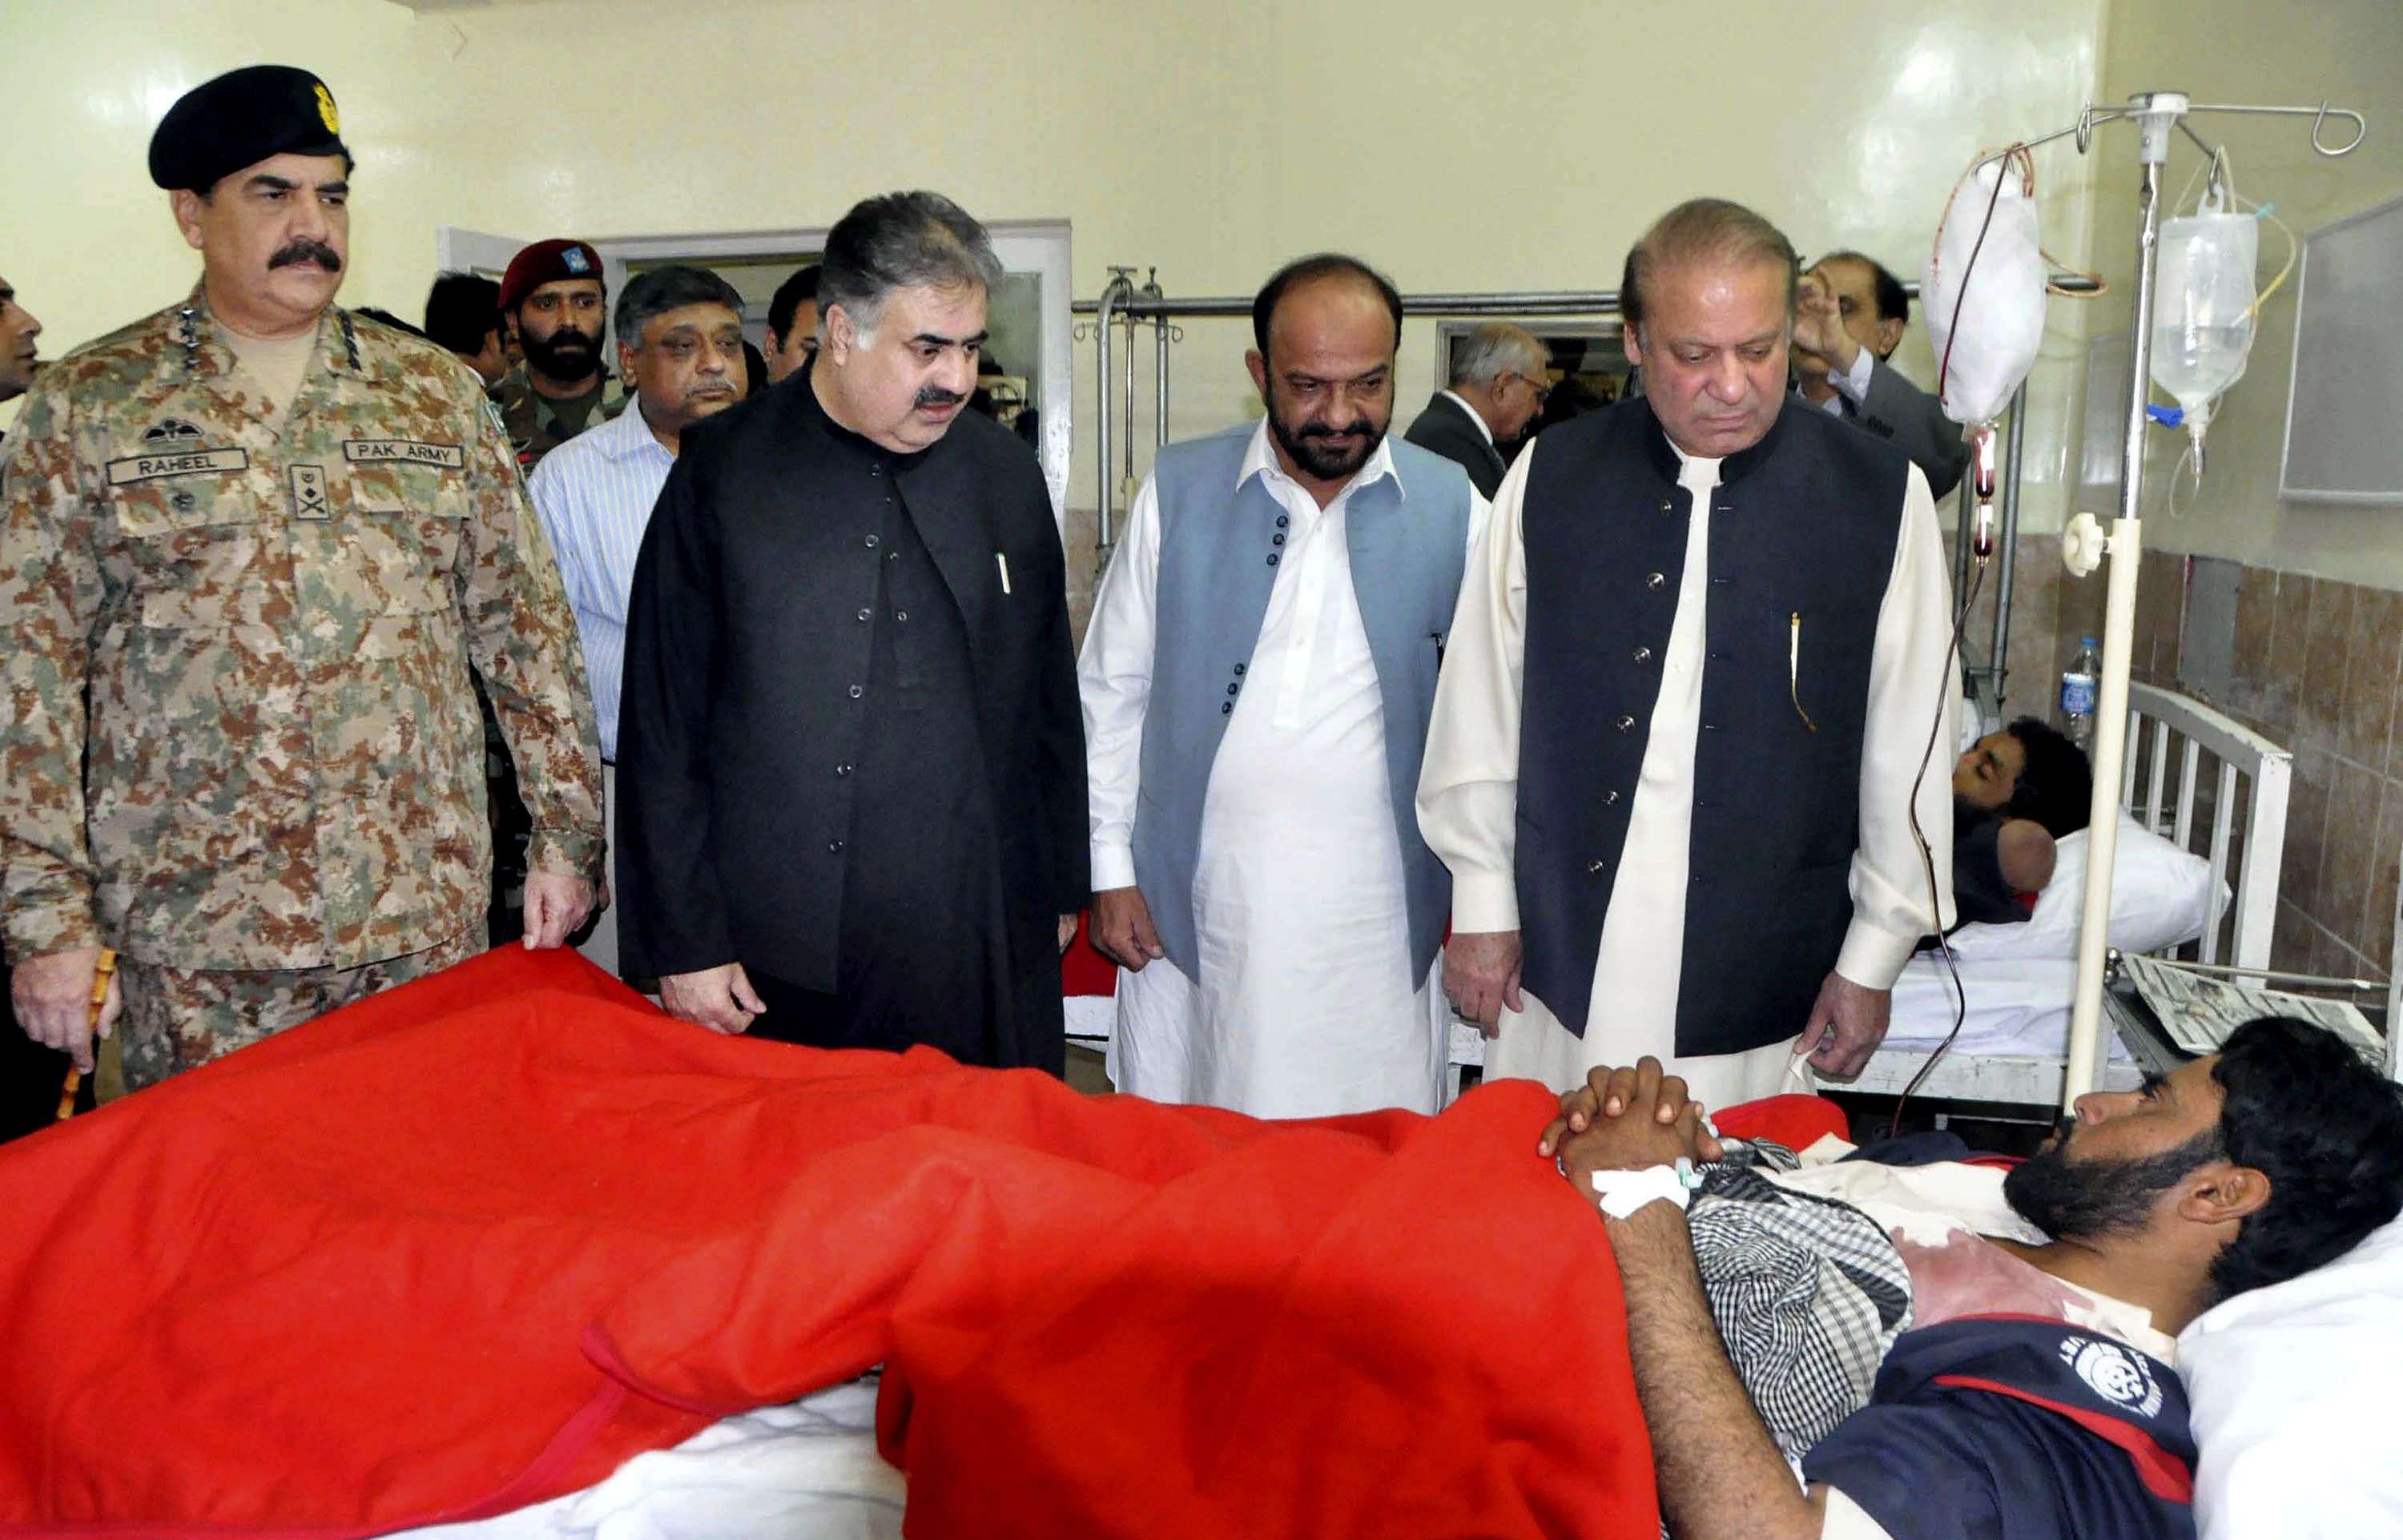 In this photo provided by Pakistan's Press Information Department, Pakistan's Prime Minister Nawaz Sharif, right, talks to a survivor of an overnight attack on the Police Training Academy, with Pakistan army chief Gen. Raheel Sharif, left, at a local hospital in Quetta, Pakistan, Tuesday, Oct. 25, 2016. Militants wearing suicide vests stormed a Pakistani police academy in the southwestern city of Quetta overnight, killing dozens of people, mostly police cadets and recruits, and waging a ferocious gun battle with troops that lasted into early hours Tuesday. (AP Photo/Press Information Department)